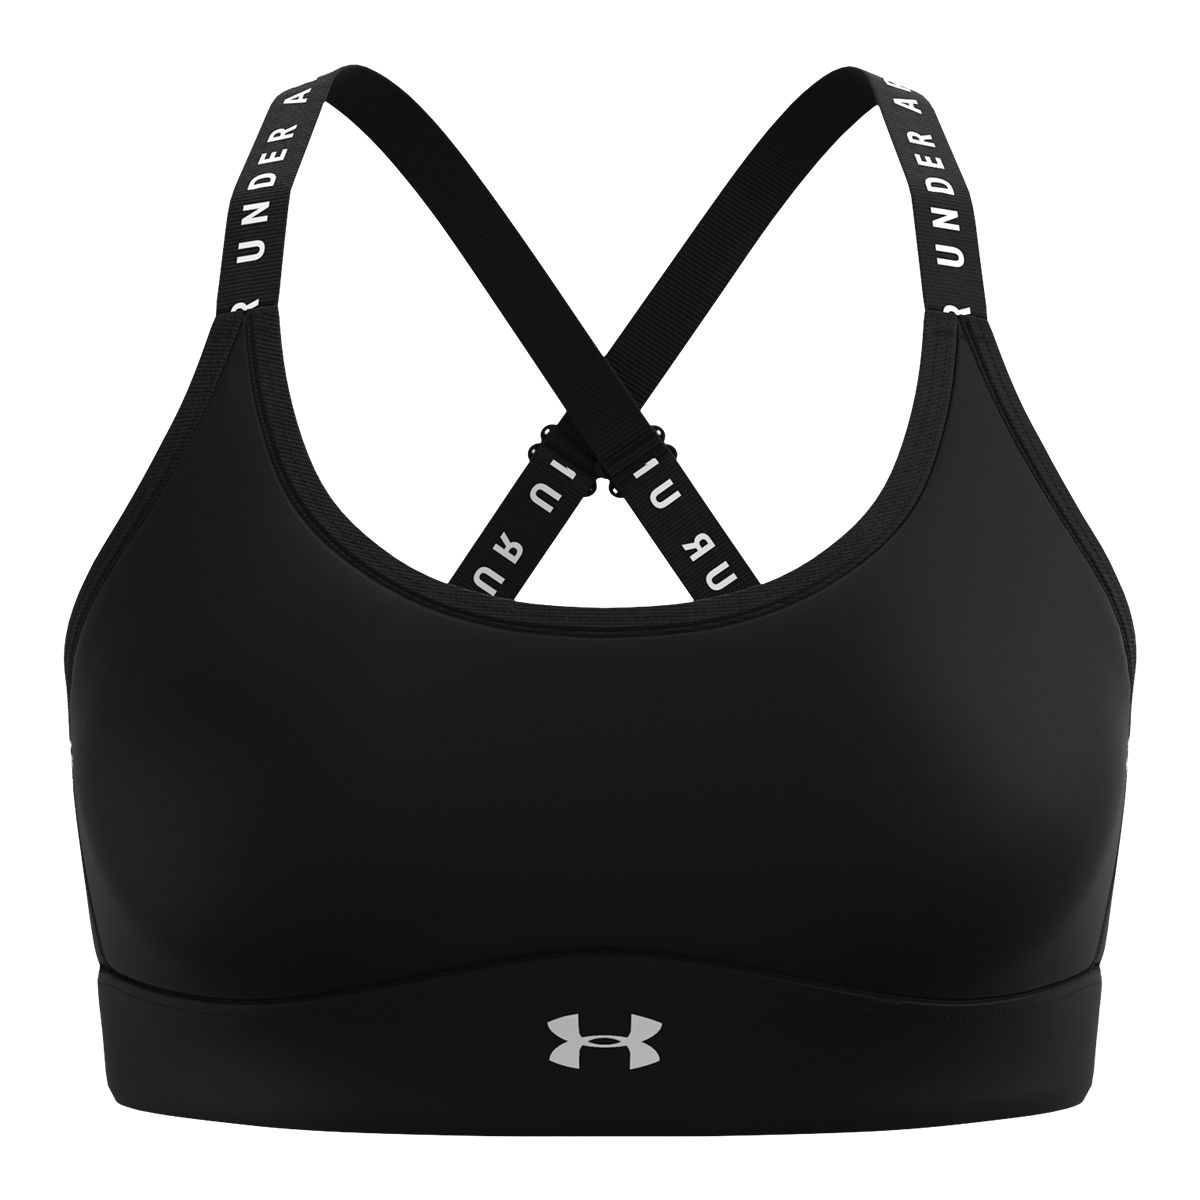 Under Armour Womens Infinity High Support Bra - Purple